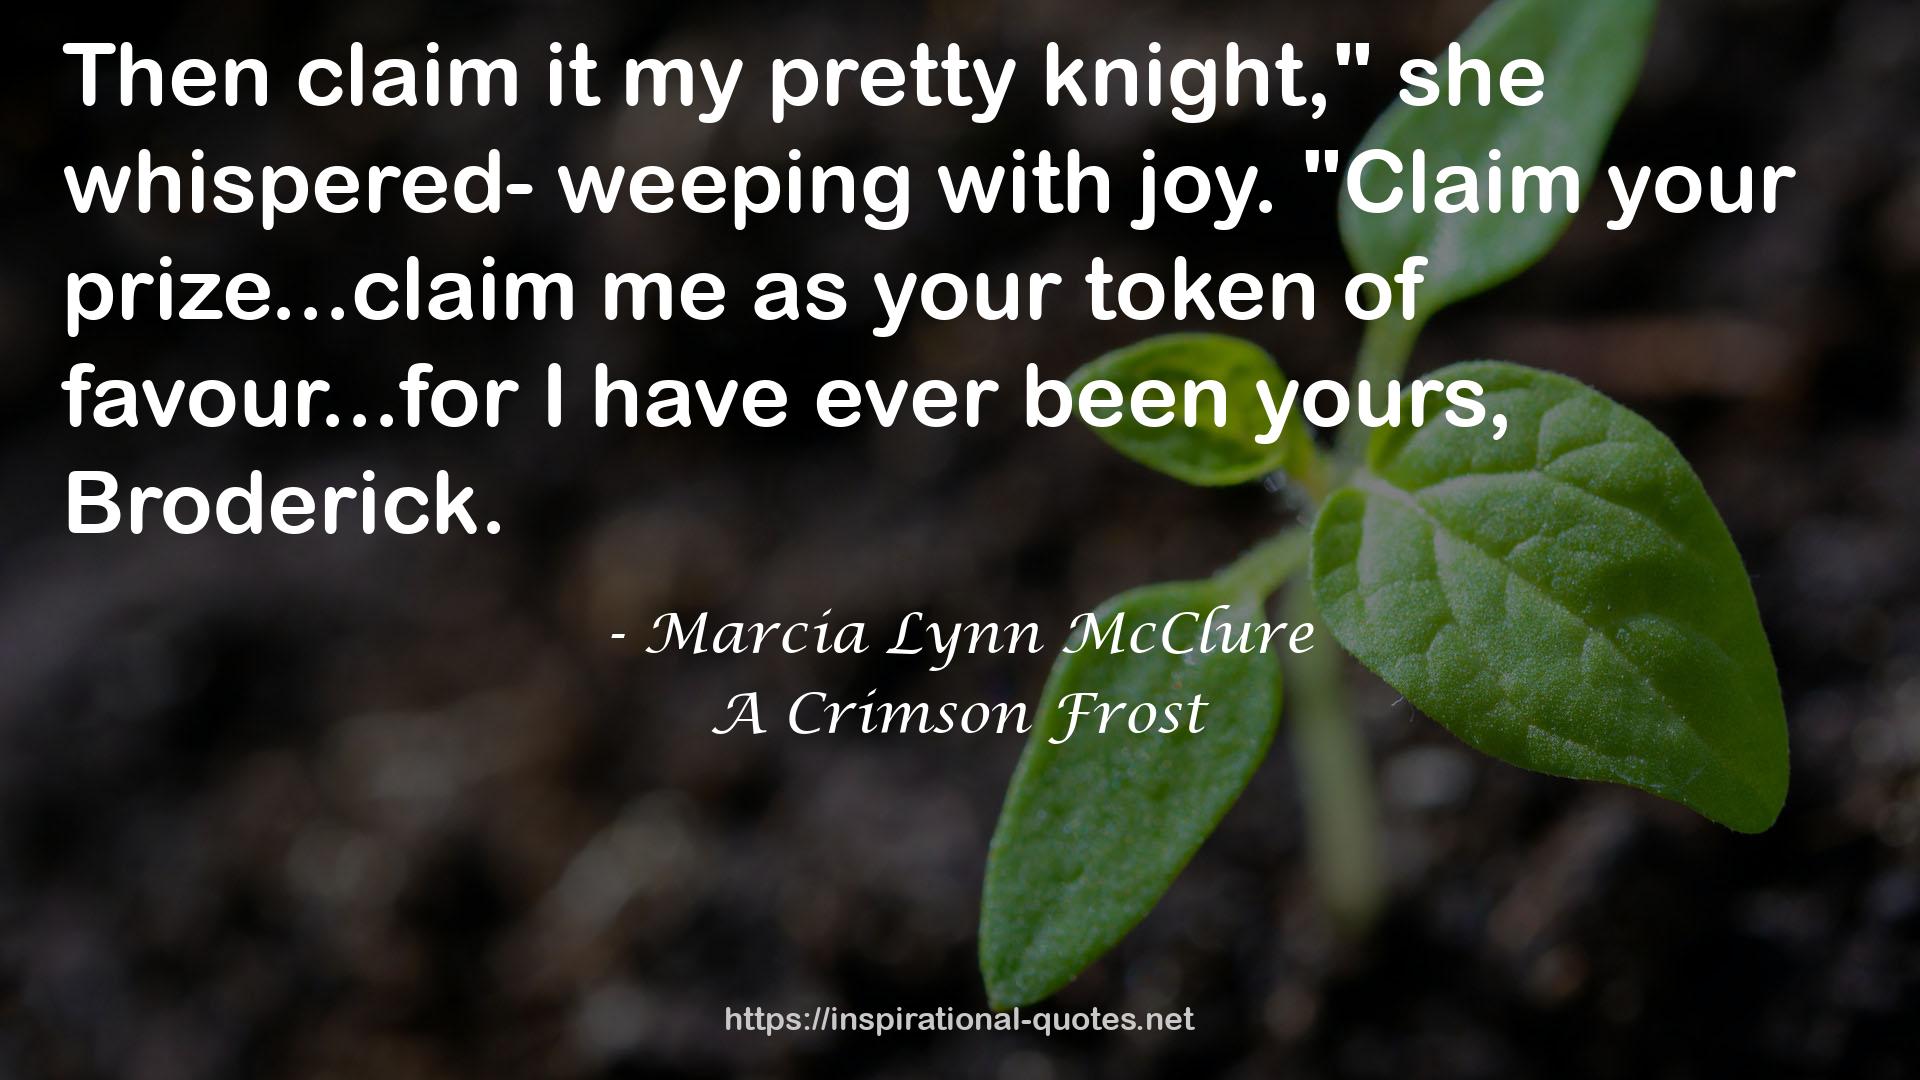 A Crimson Frost QUOTES